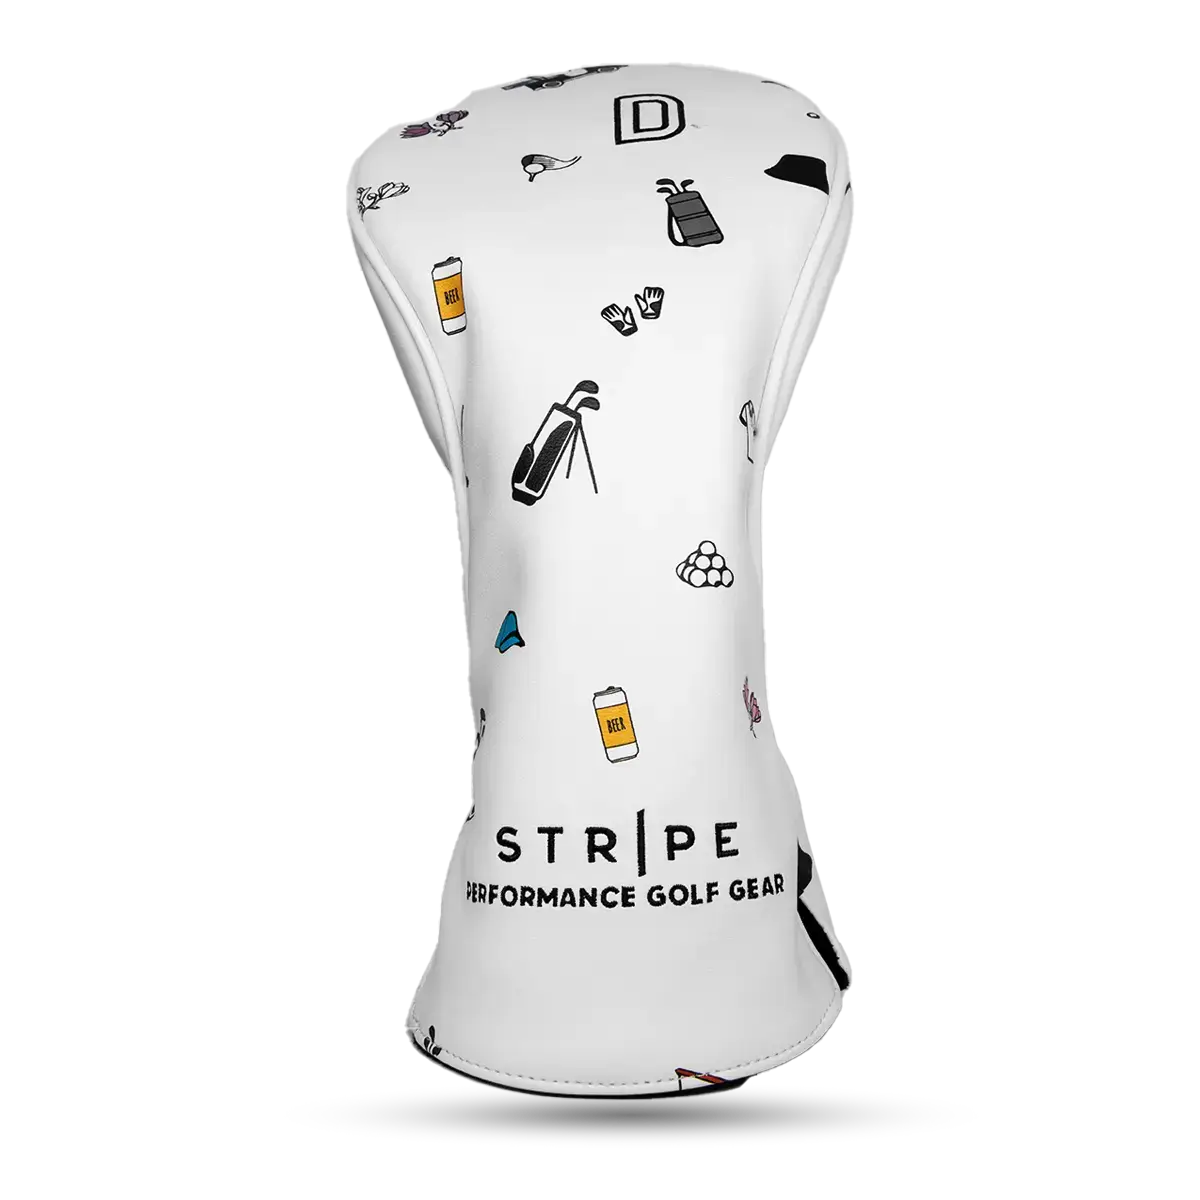 White leather driver headcover with patterns from a day on the golf course. Stripe golf's own pattern print